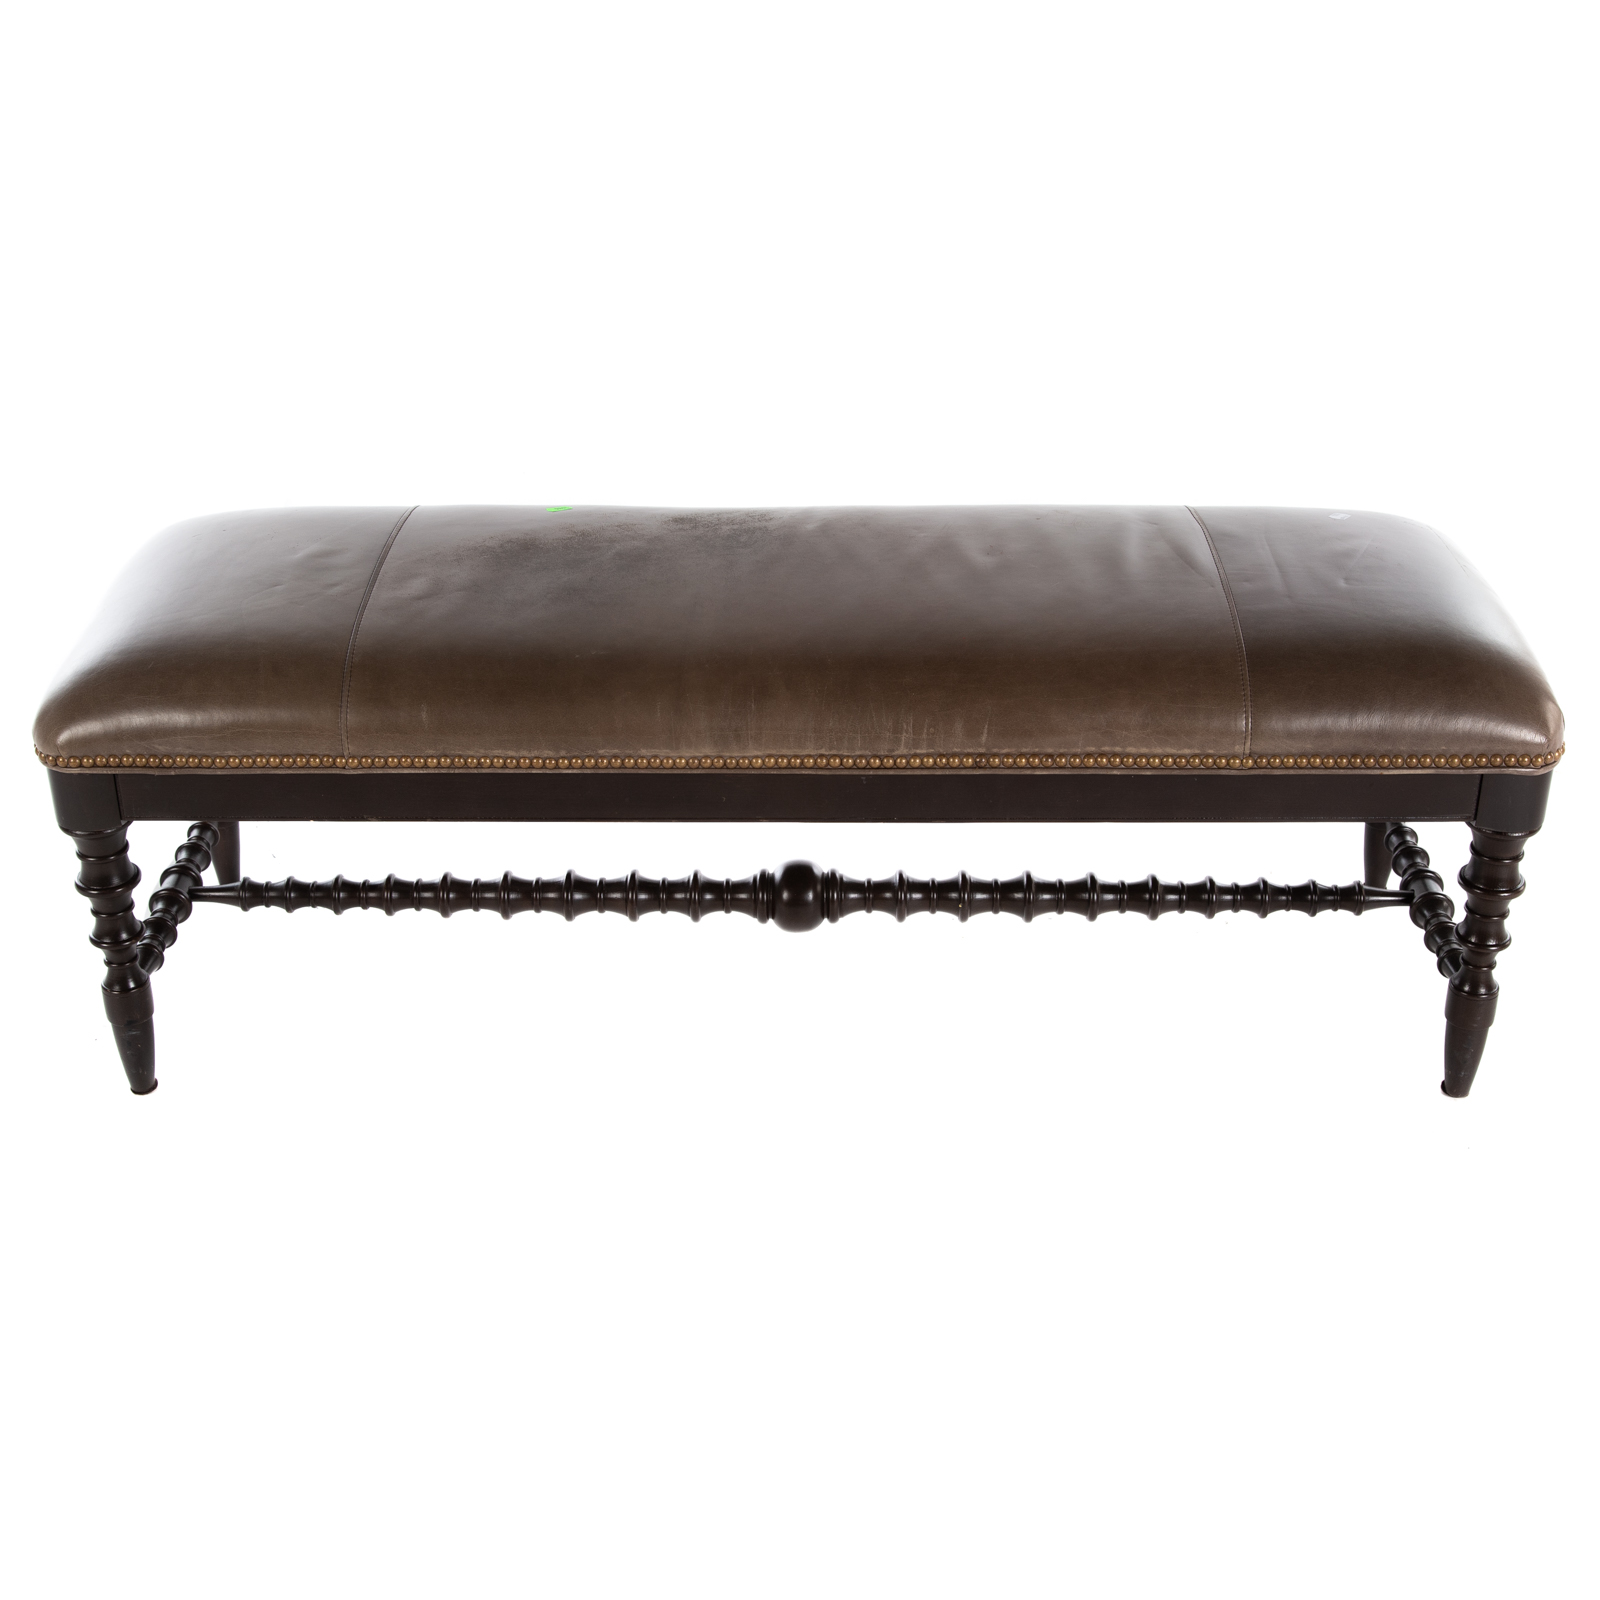 ETHAN ALLEN LEATHER BENCH 20th 3cae56